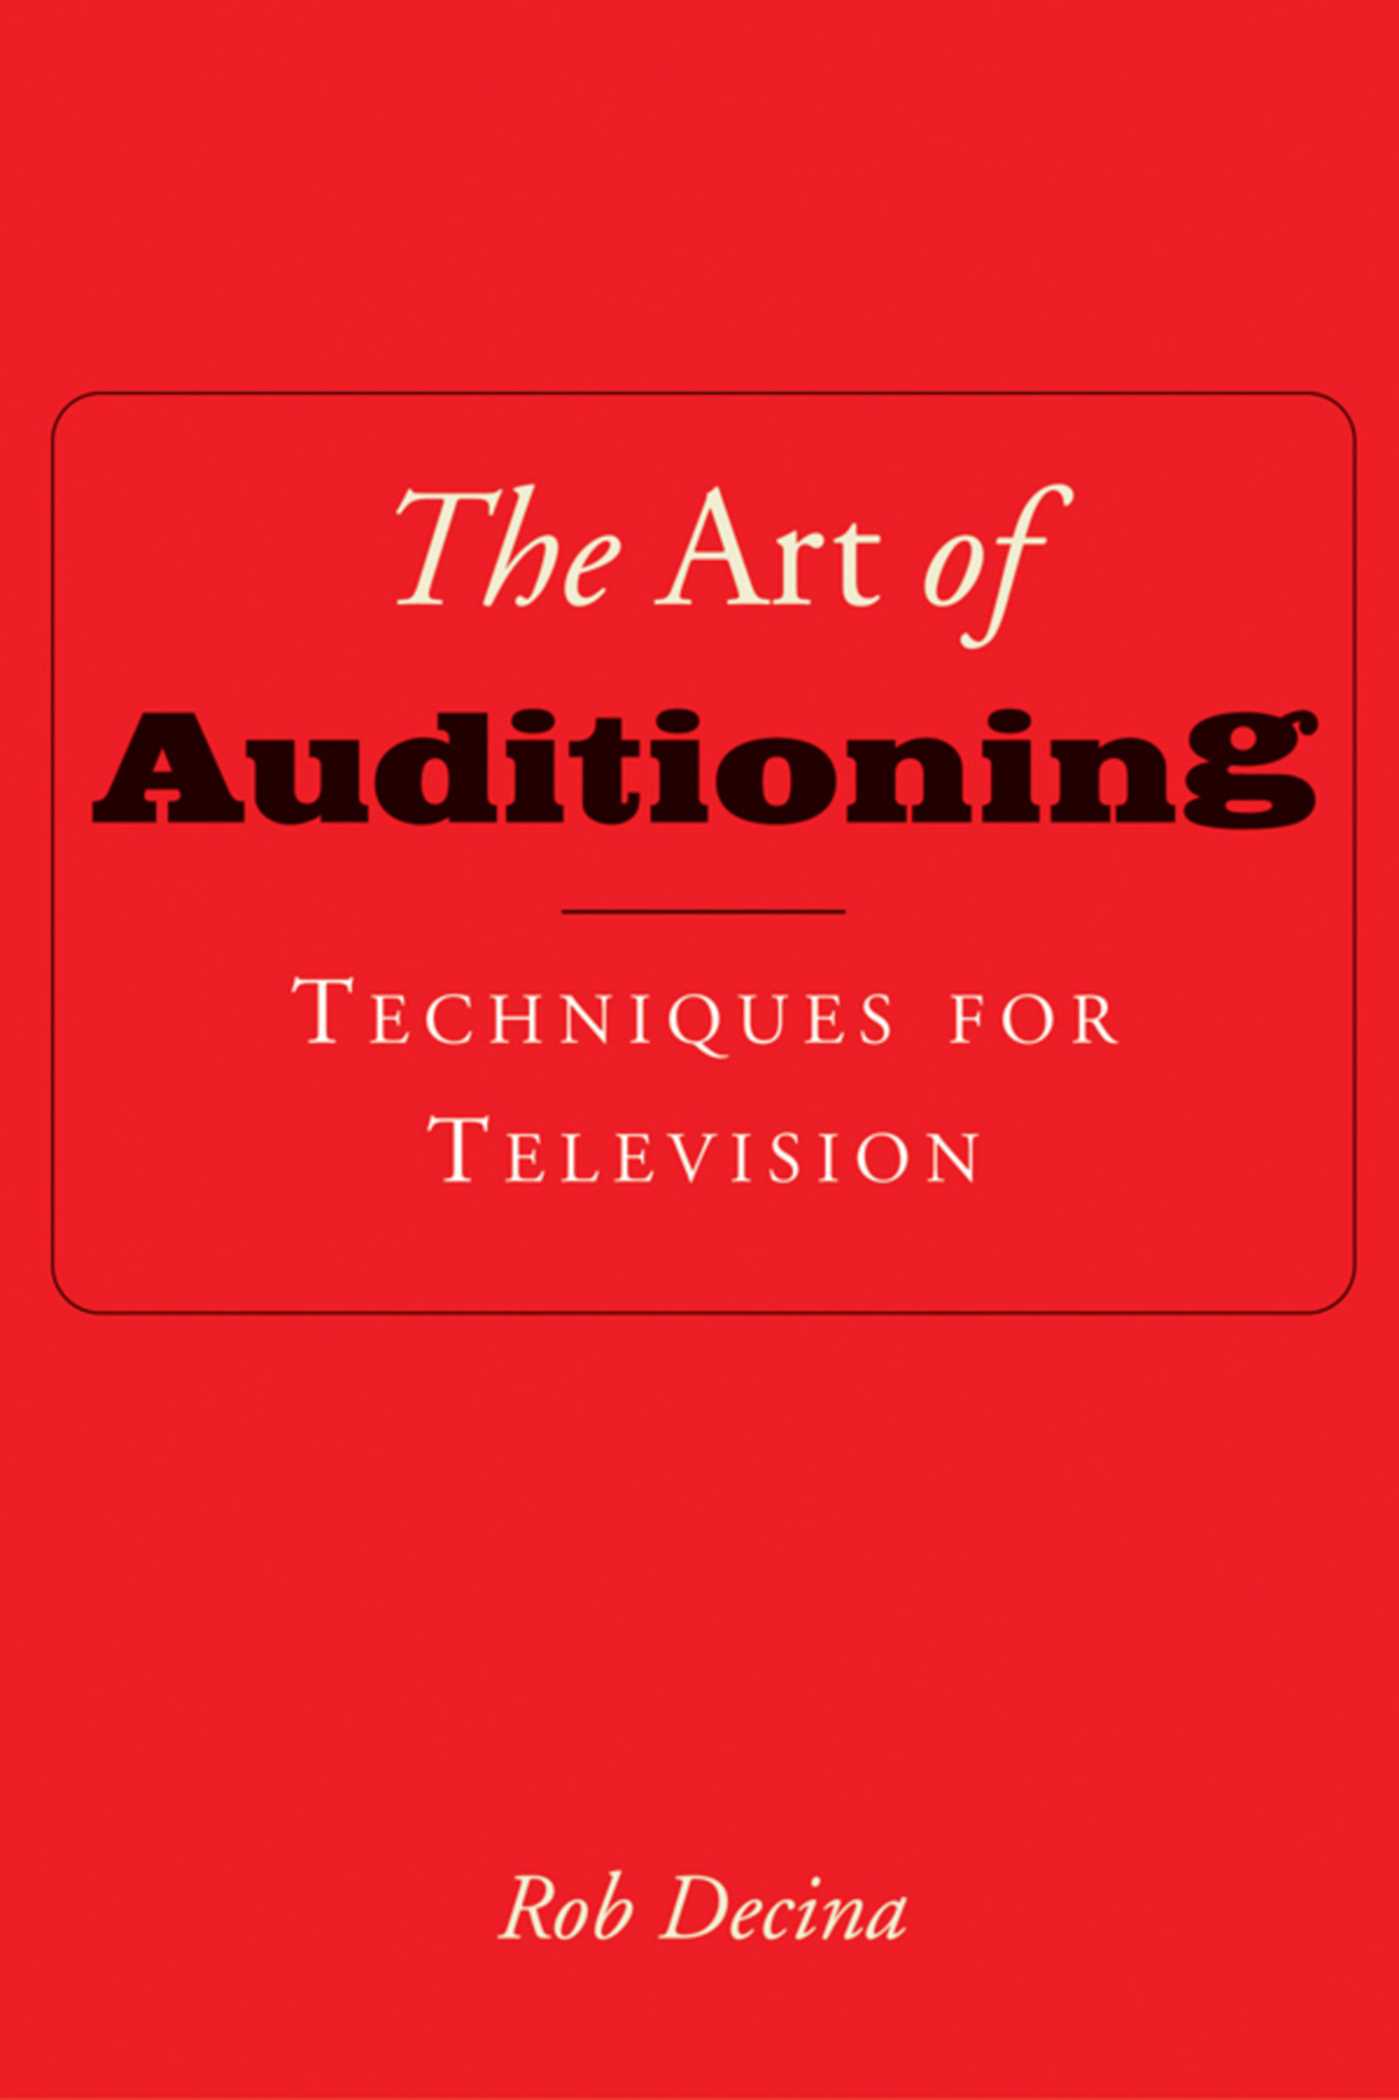 The Art of Auditioning - 10-14.99